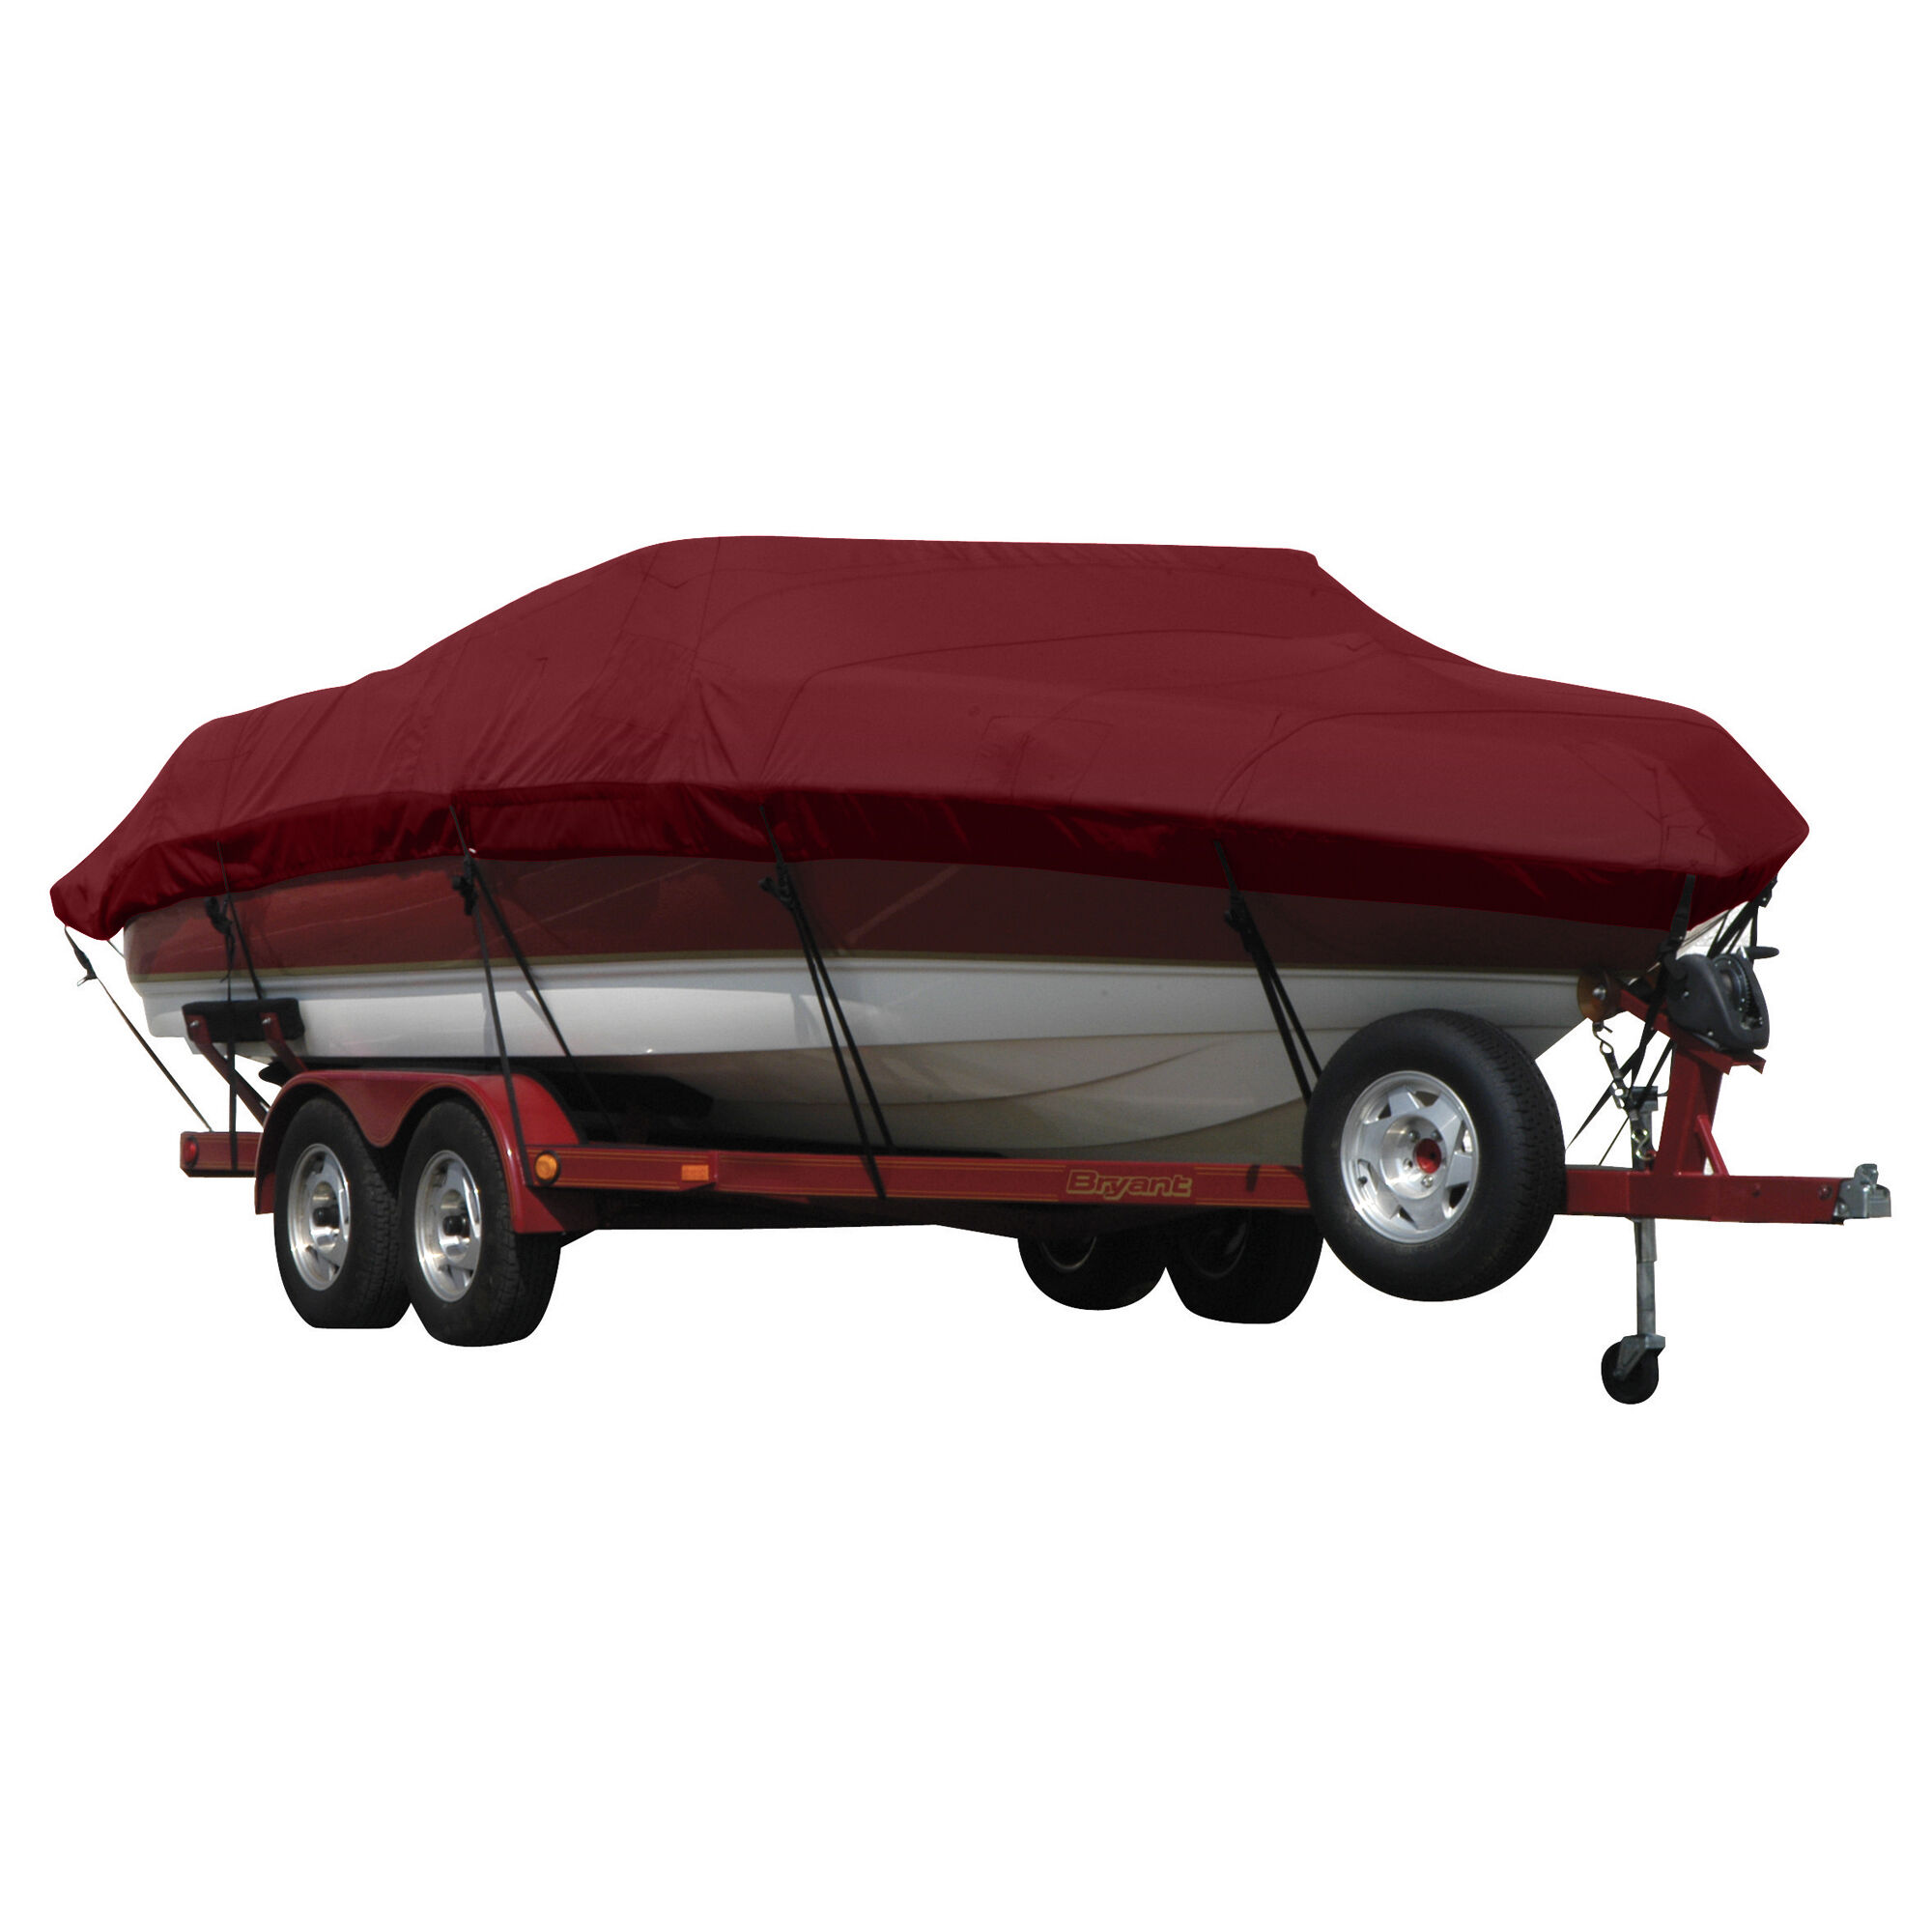 Covermate Exact Fit Sunbrella Boat Cover for Sea Ray 250 Cc 250 Cc No Pulpit I/O. Burgundy Acrylic